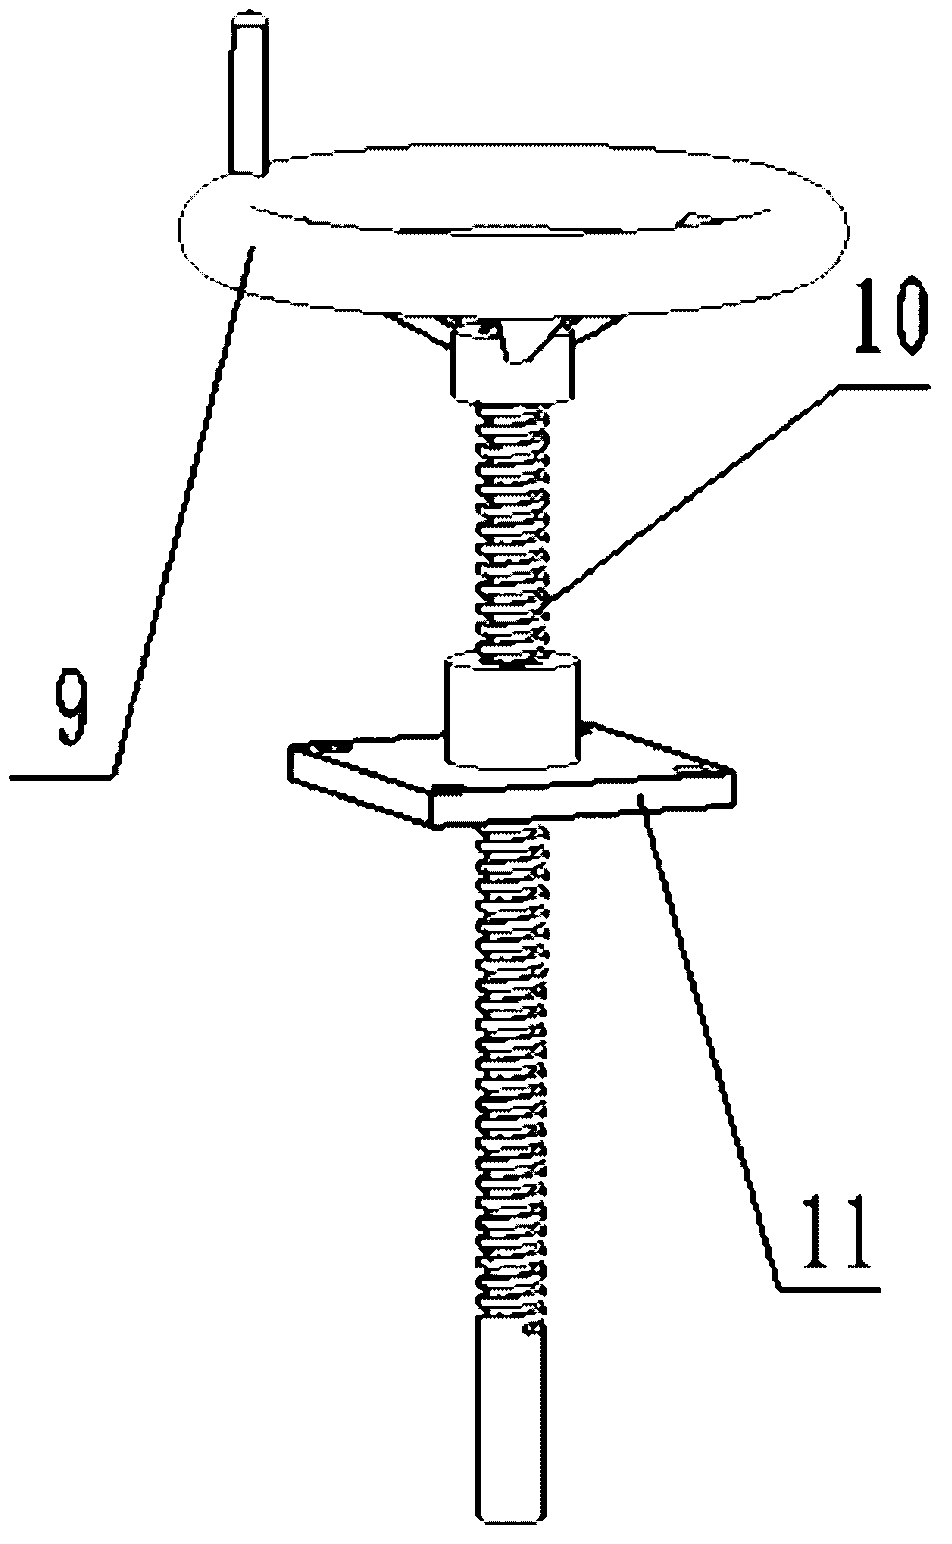 Soil cutting device for accurately obtaining non-rhizosphere soils at different distances from rhizosphere